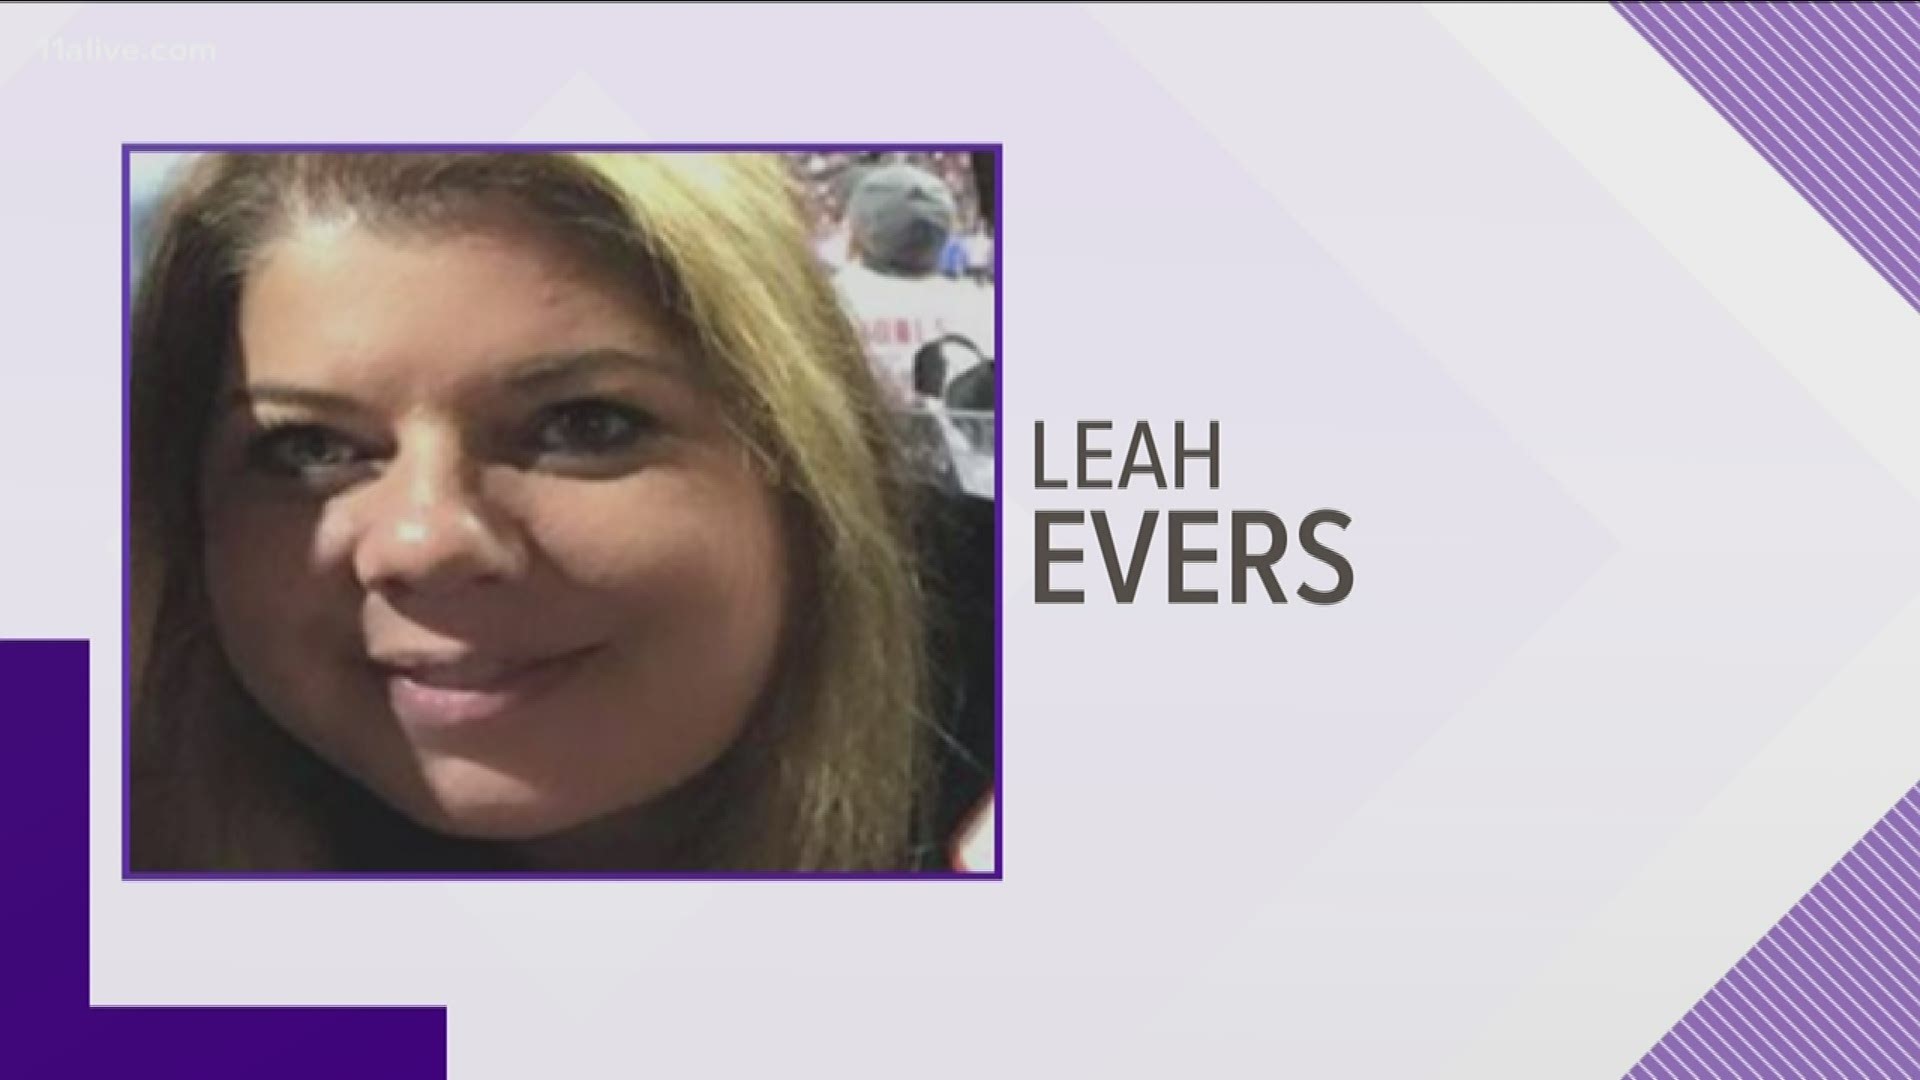 Leah Evers conned dozens out of Super Bowl tickets, police said.